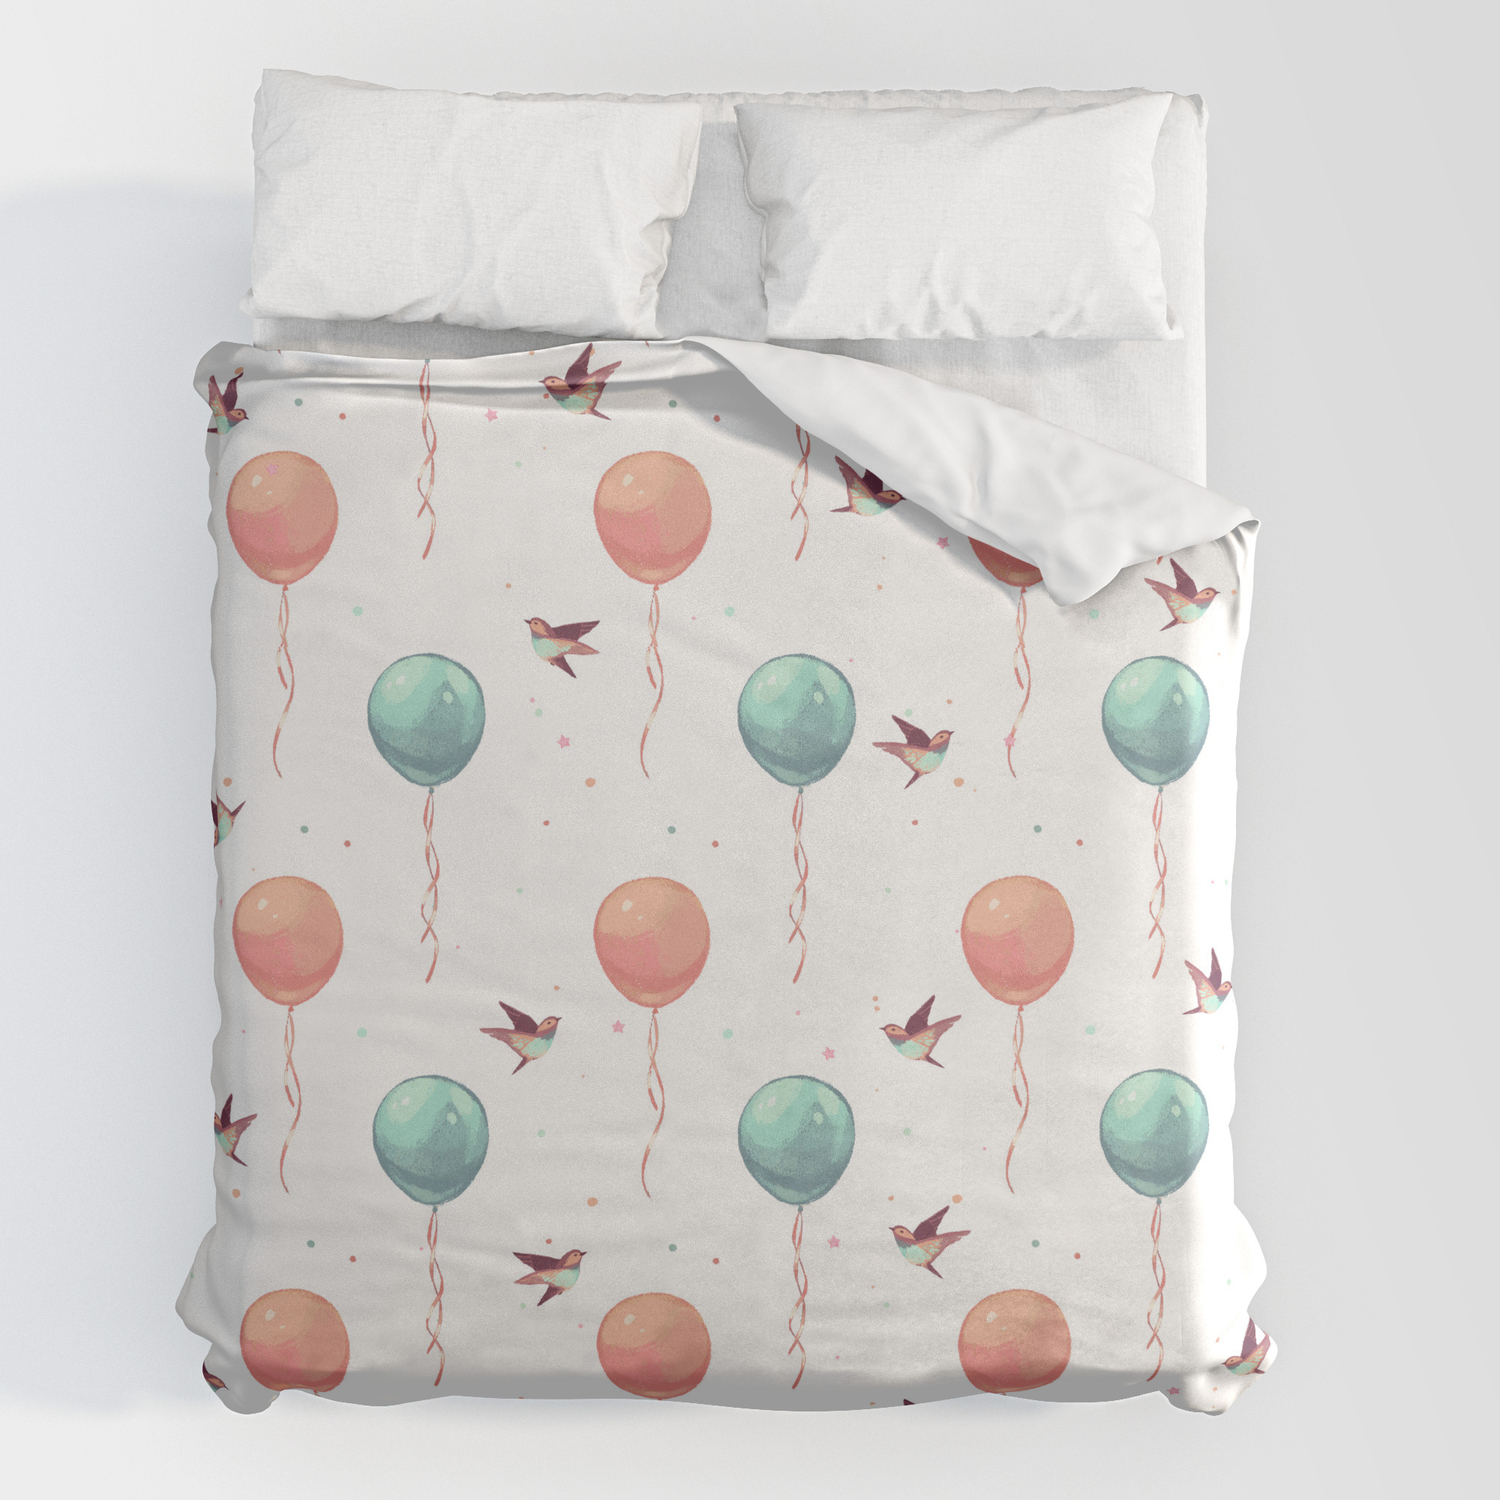 Balloons Watercolor Duvet Cover, Teal And Brown Duvet Cover